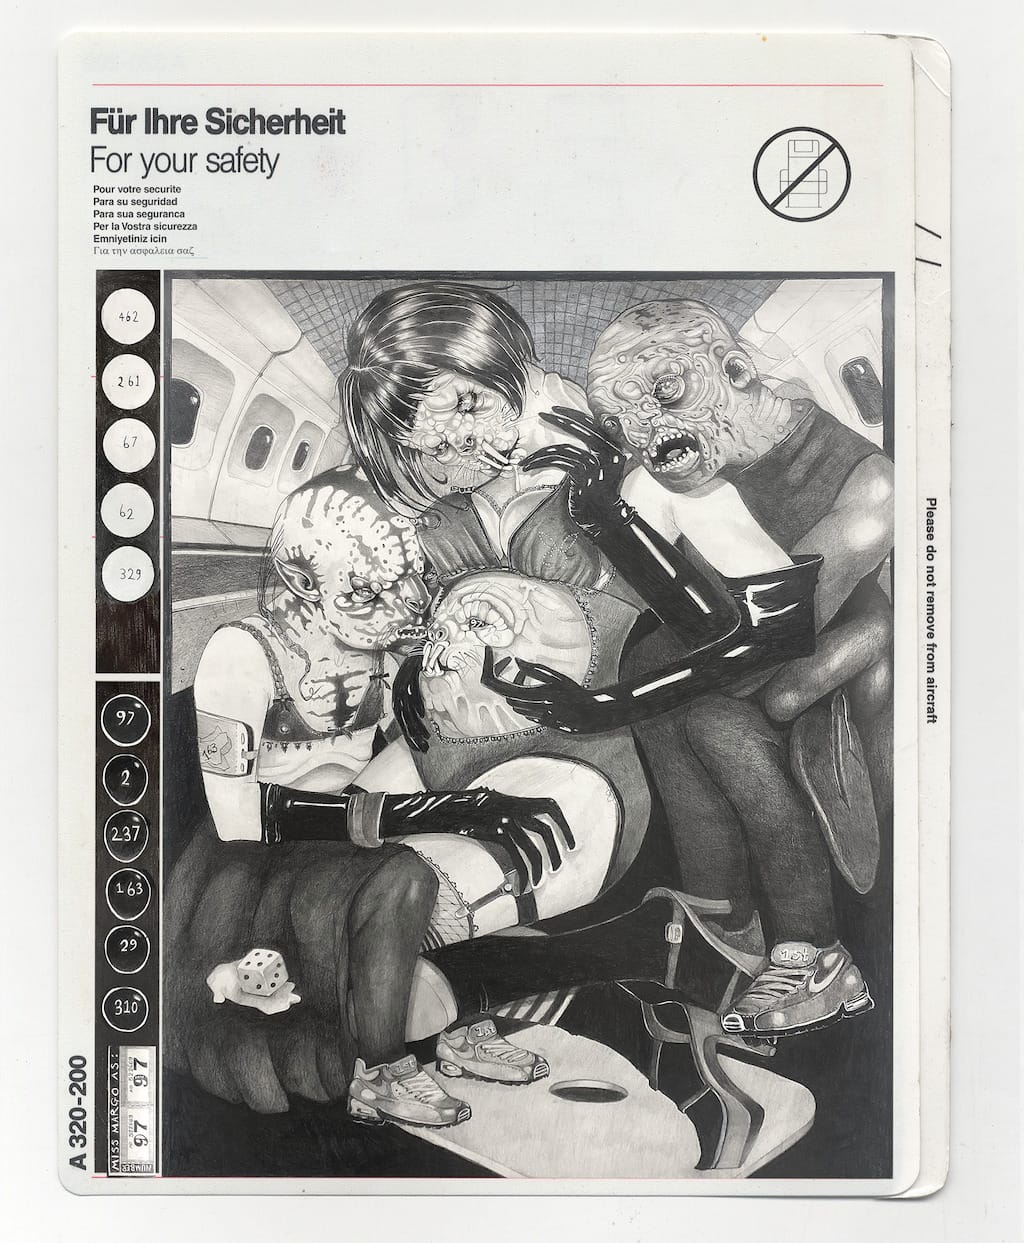 Scan of an airline safety booklet wth a drawing by Jenkin Van Zyl.